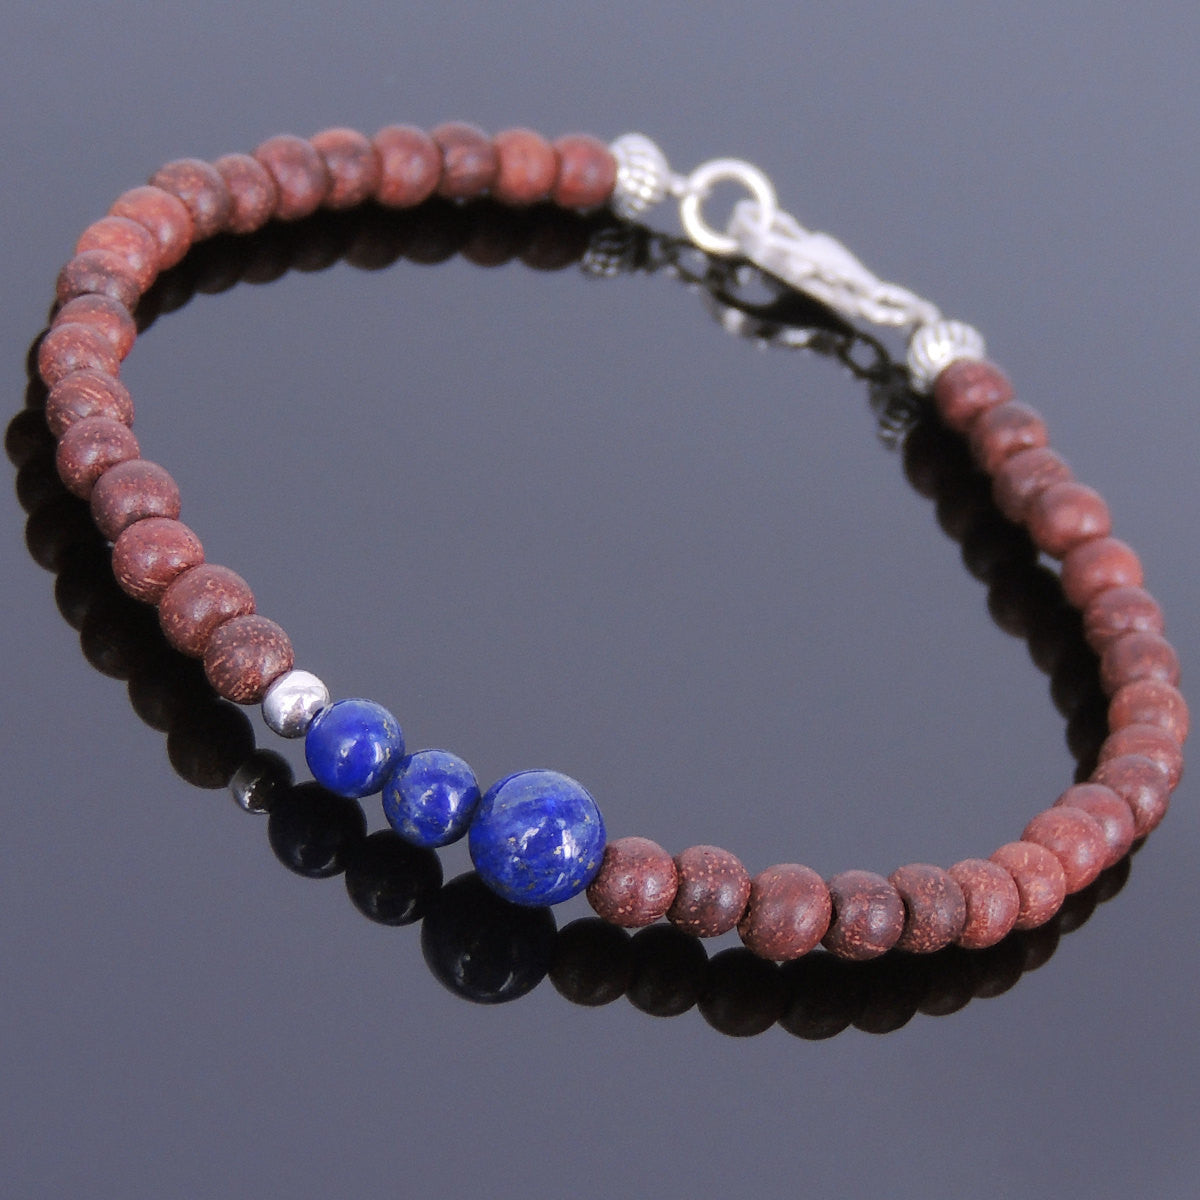 Rosewood & Lapis Lazuli Healing Gemstone Bracelet with S925 Sterling Silver Spacer Beads & Clasp BR199